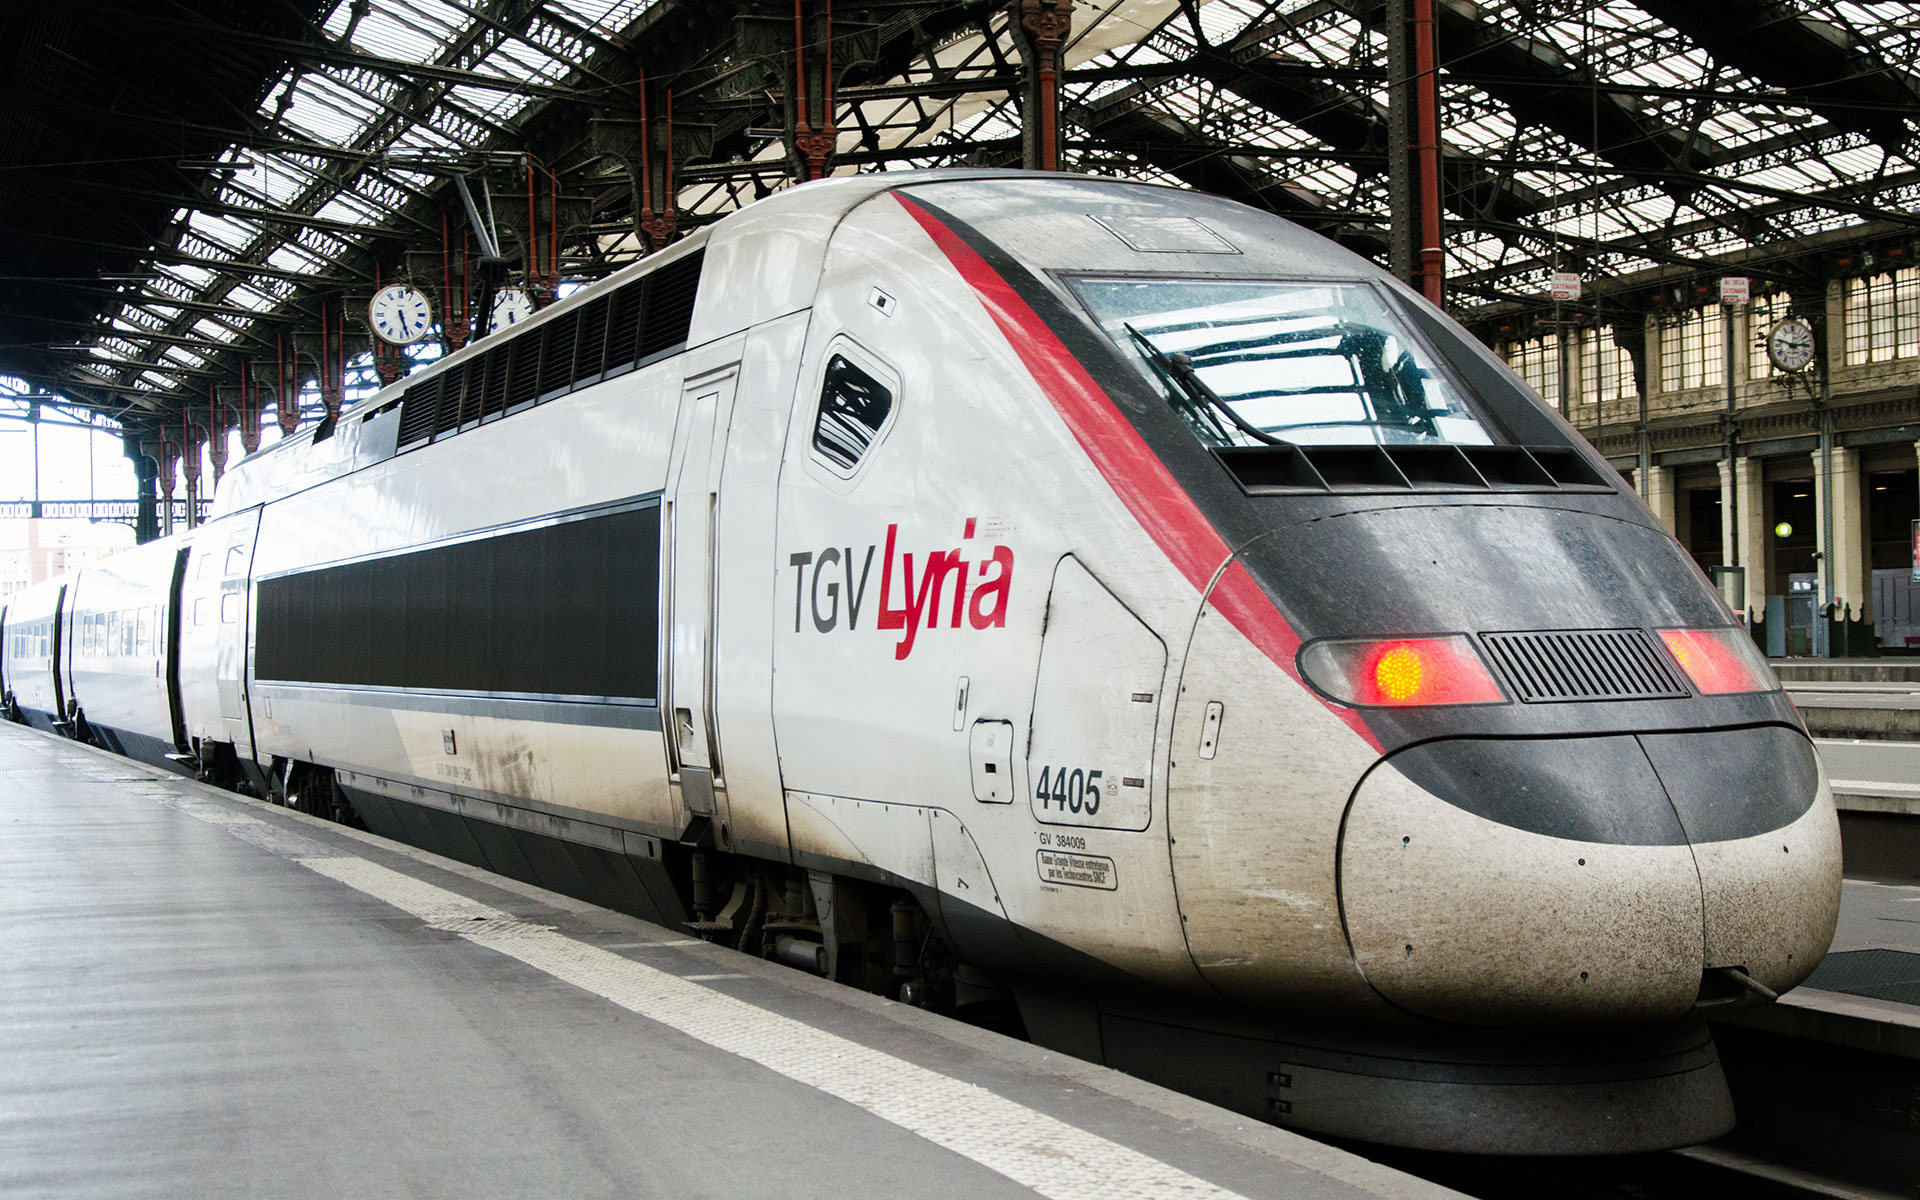 Europe by Rail | Lyria Connections: An Update for December 2019